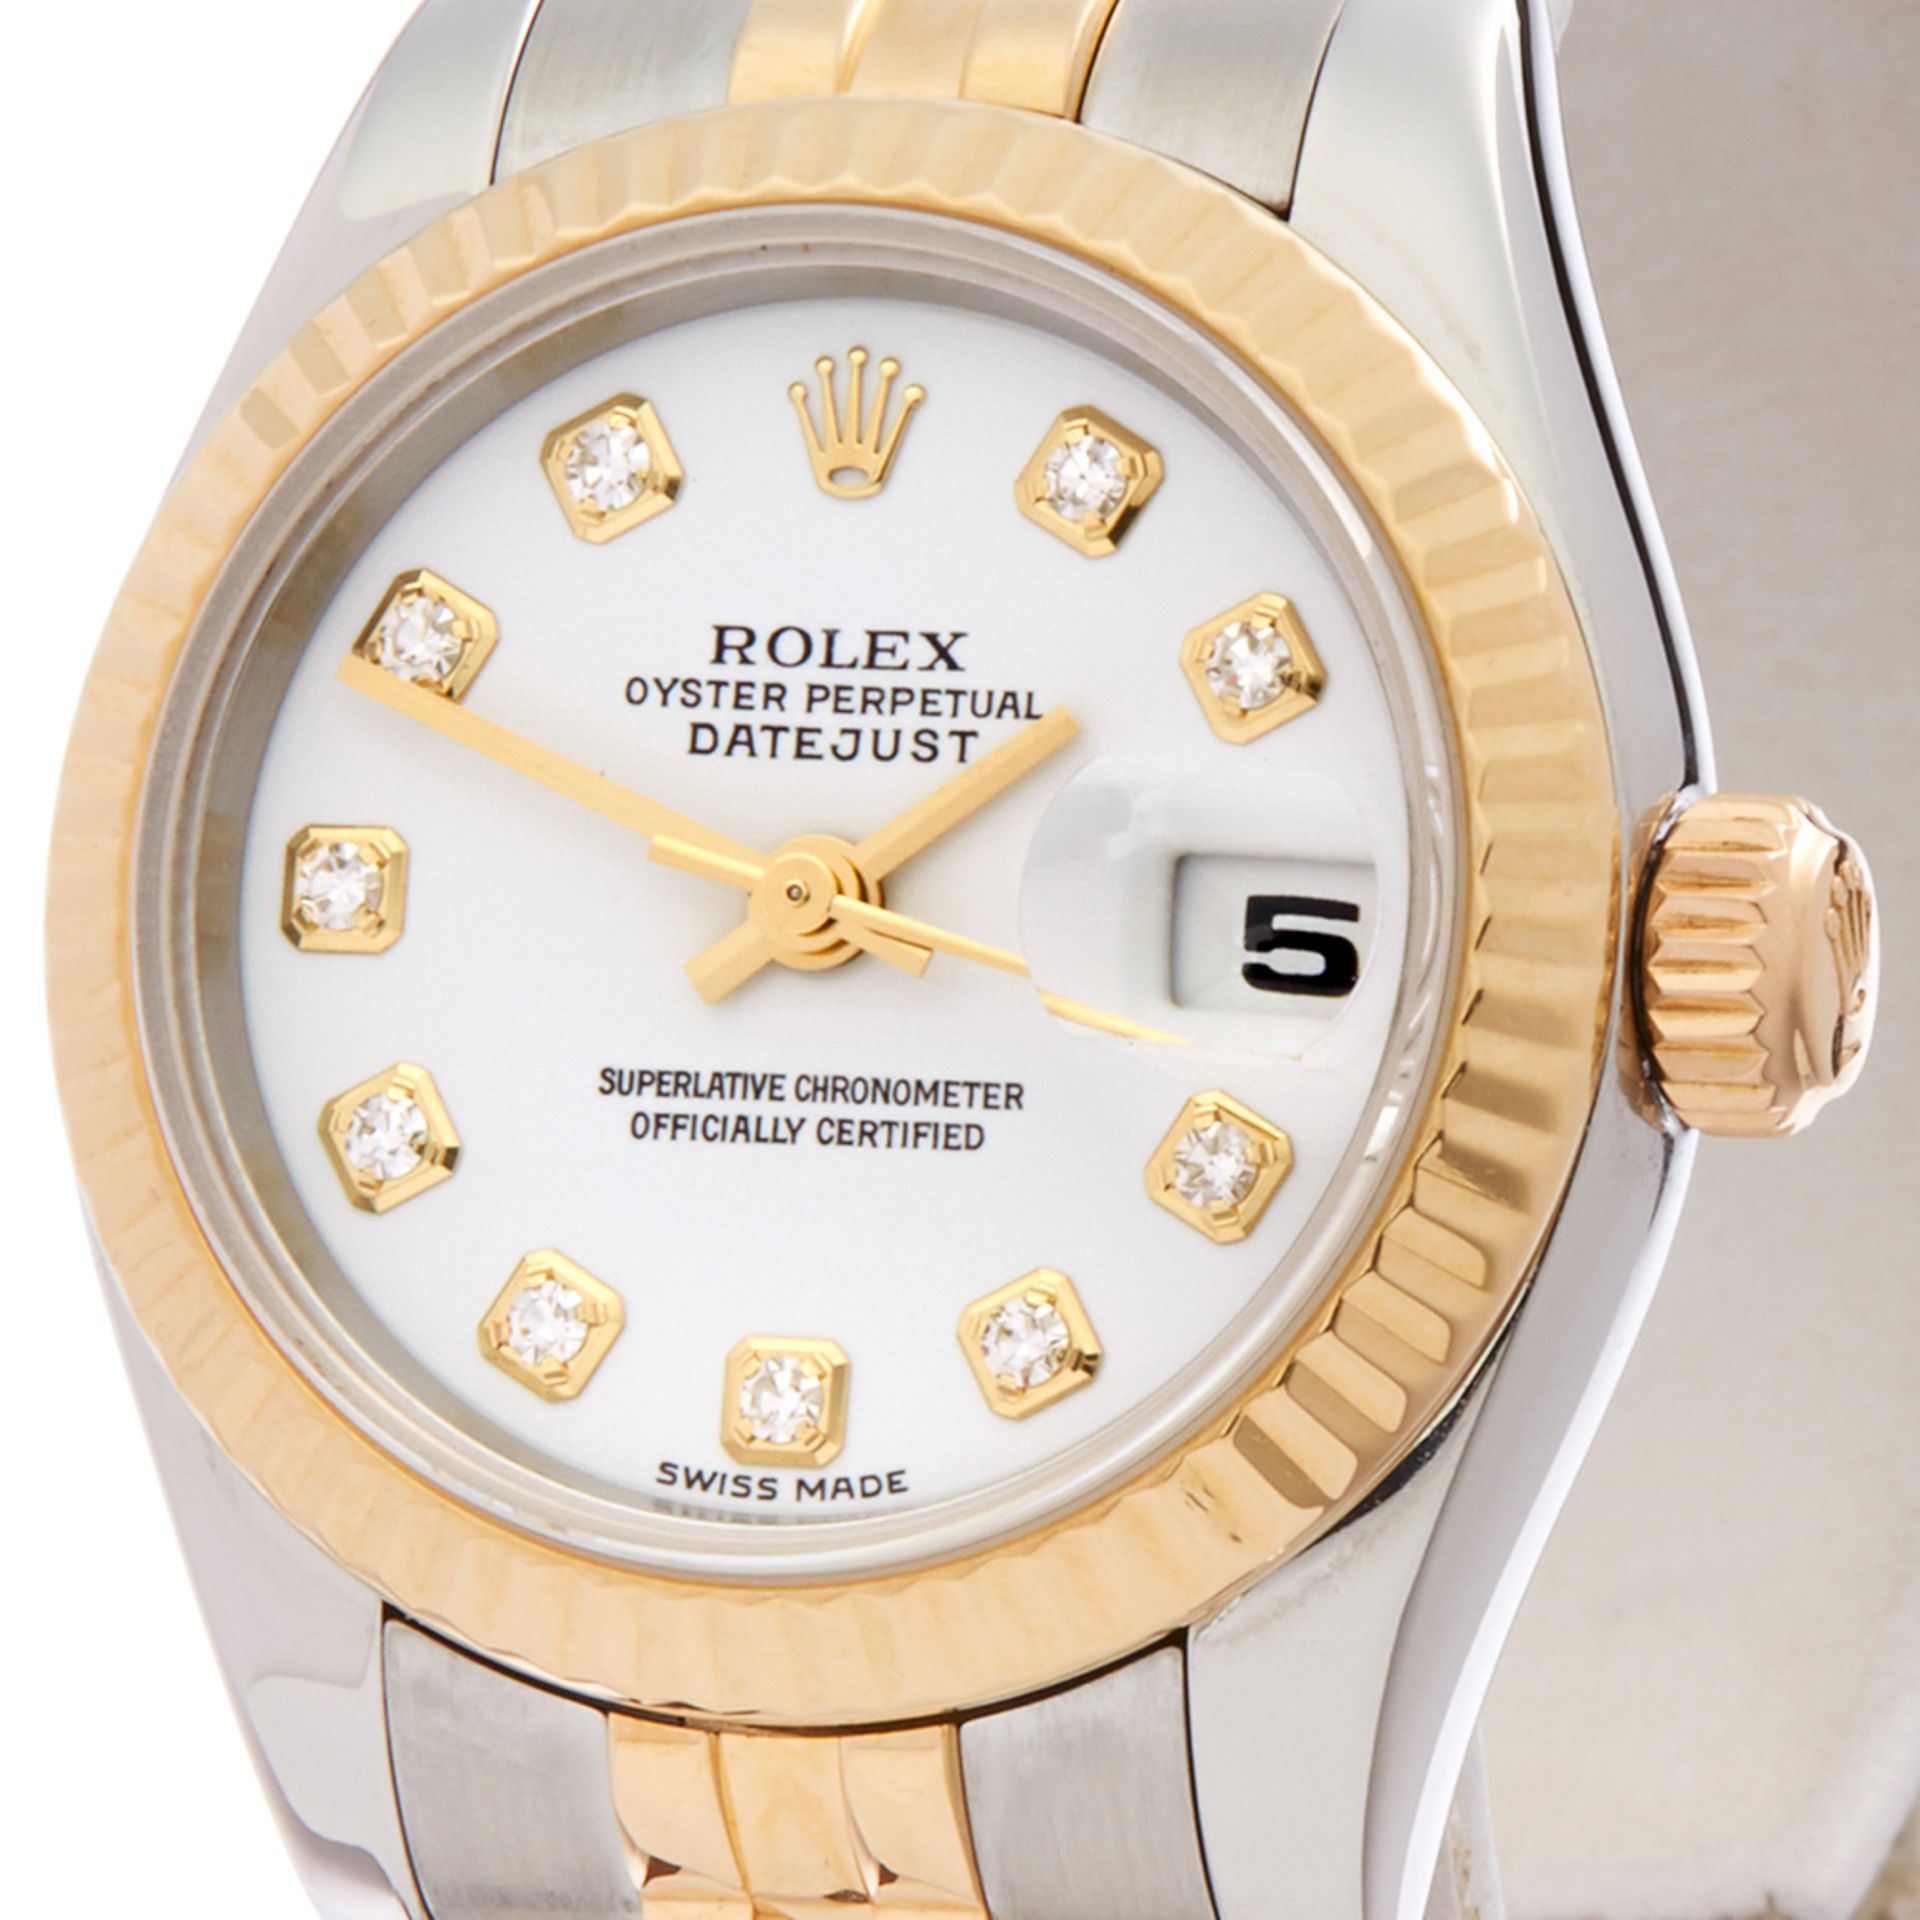 2005 Rolex Datejust 26 Stainless Steel & 18K Yellow Gold - 179173 - Image 6 of 7